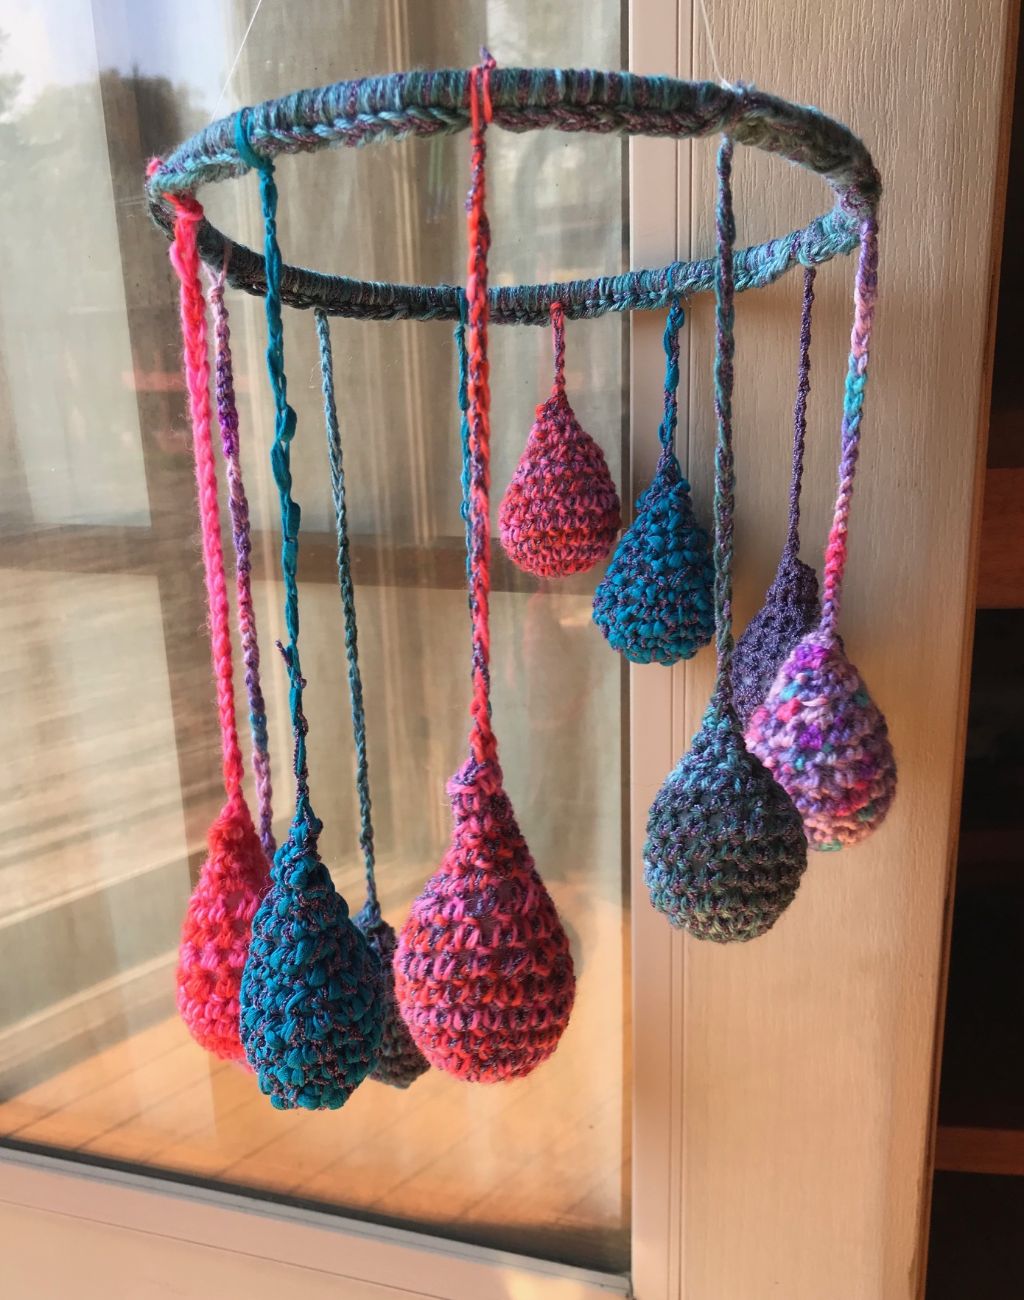 Hanging Mobile Raindrops Teardrops in Blues Purples and Pinks